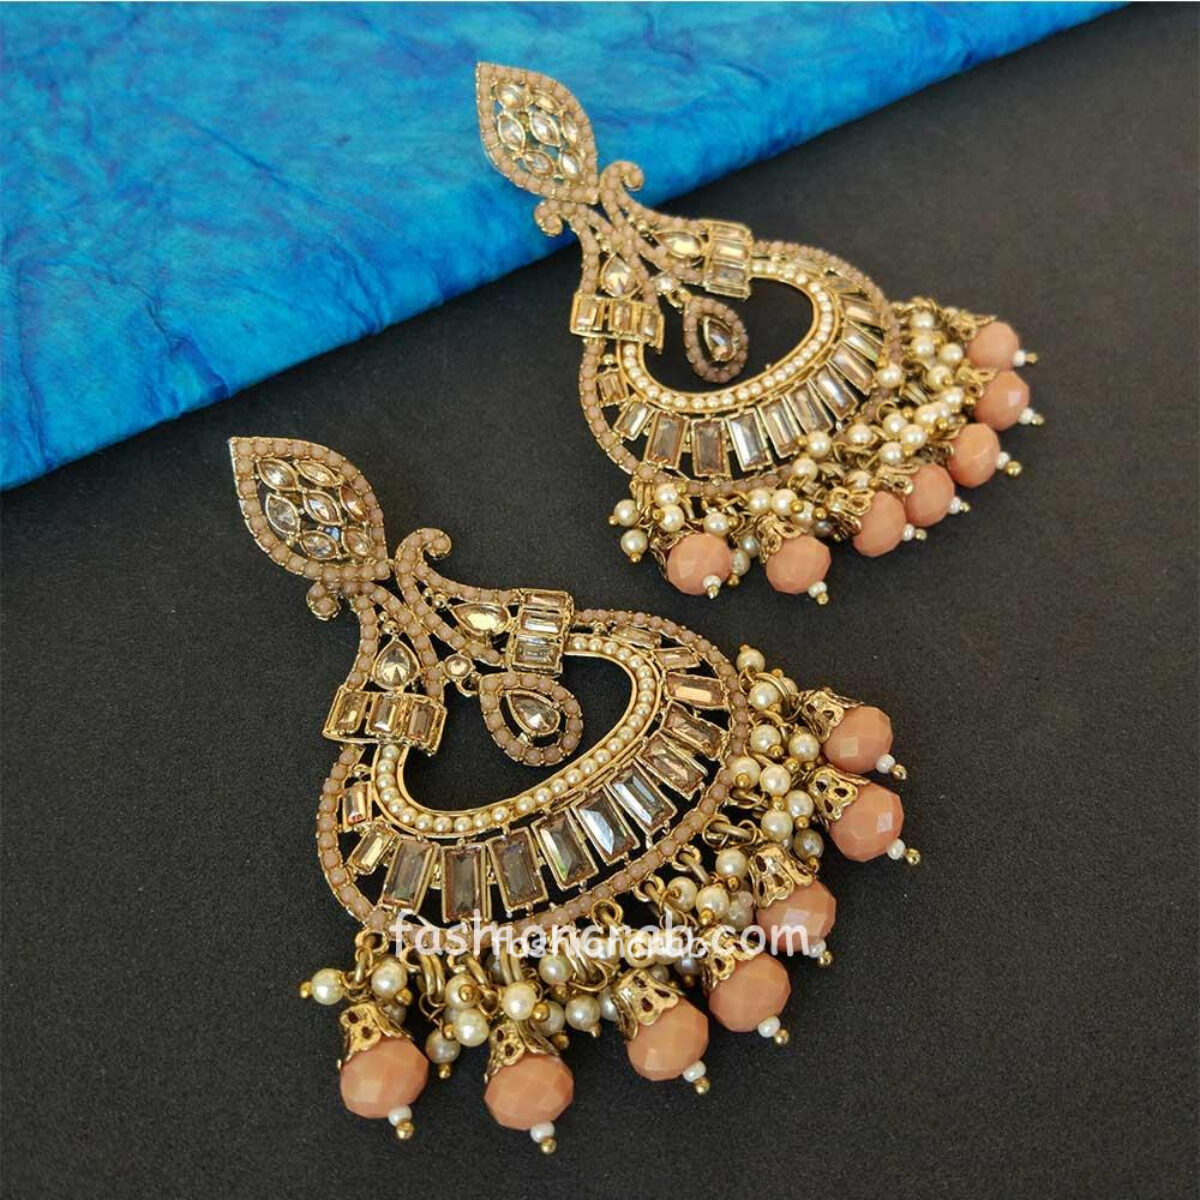 Light Peach Pearl Long Chandbali Earring for Party by FashionCrab® 